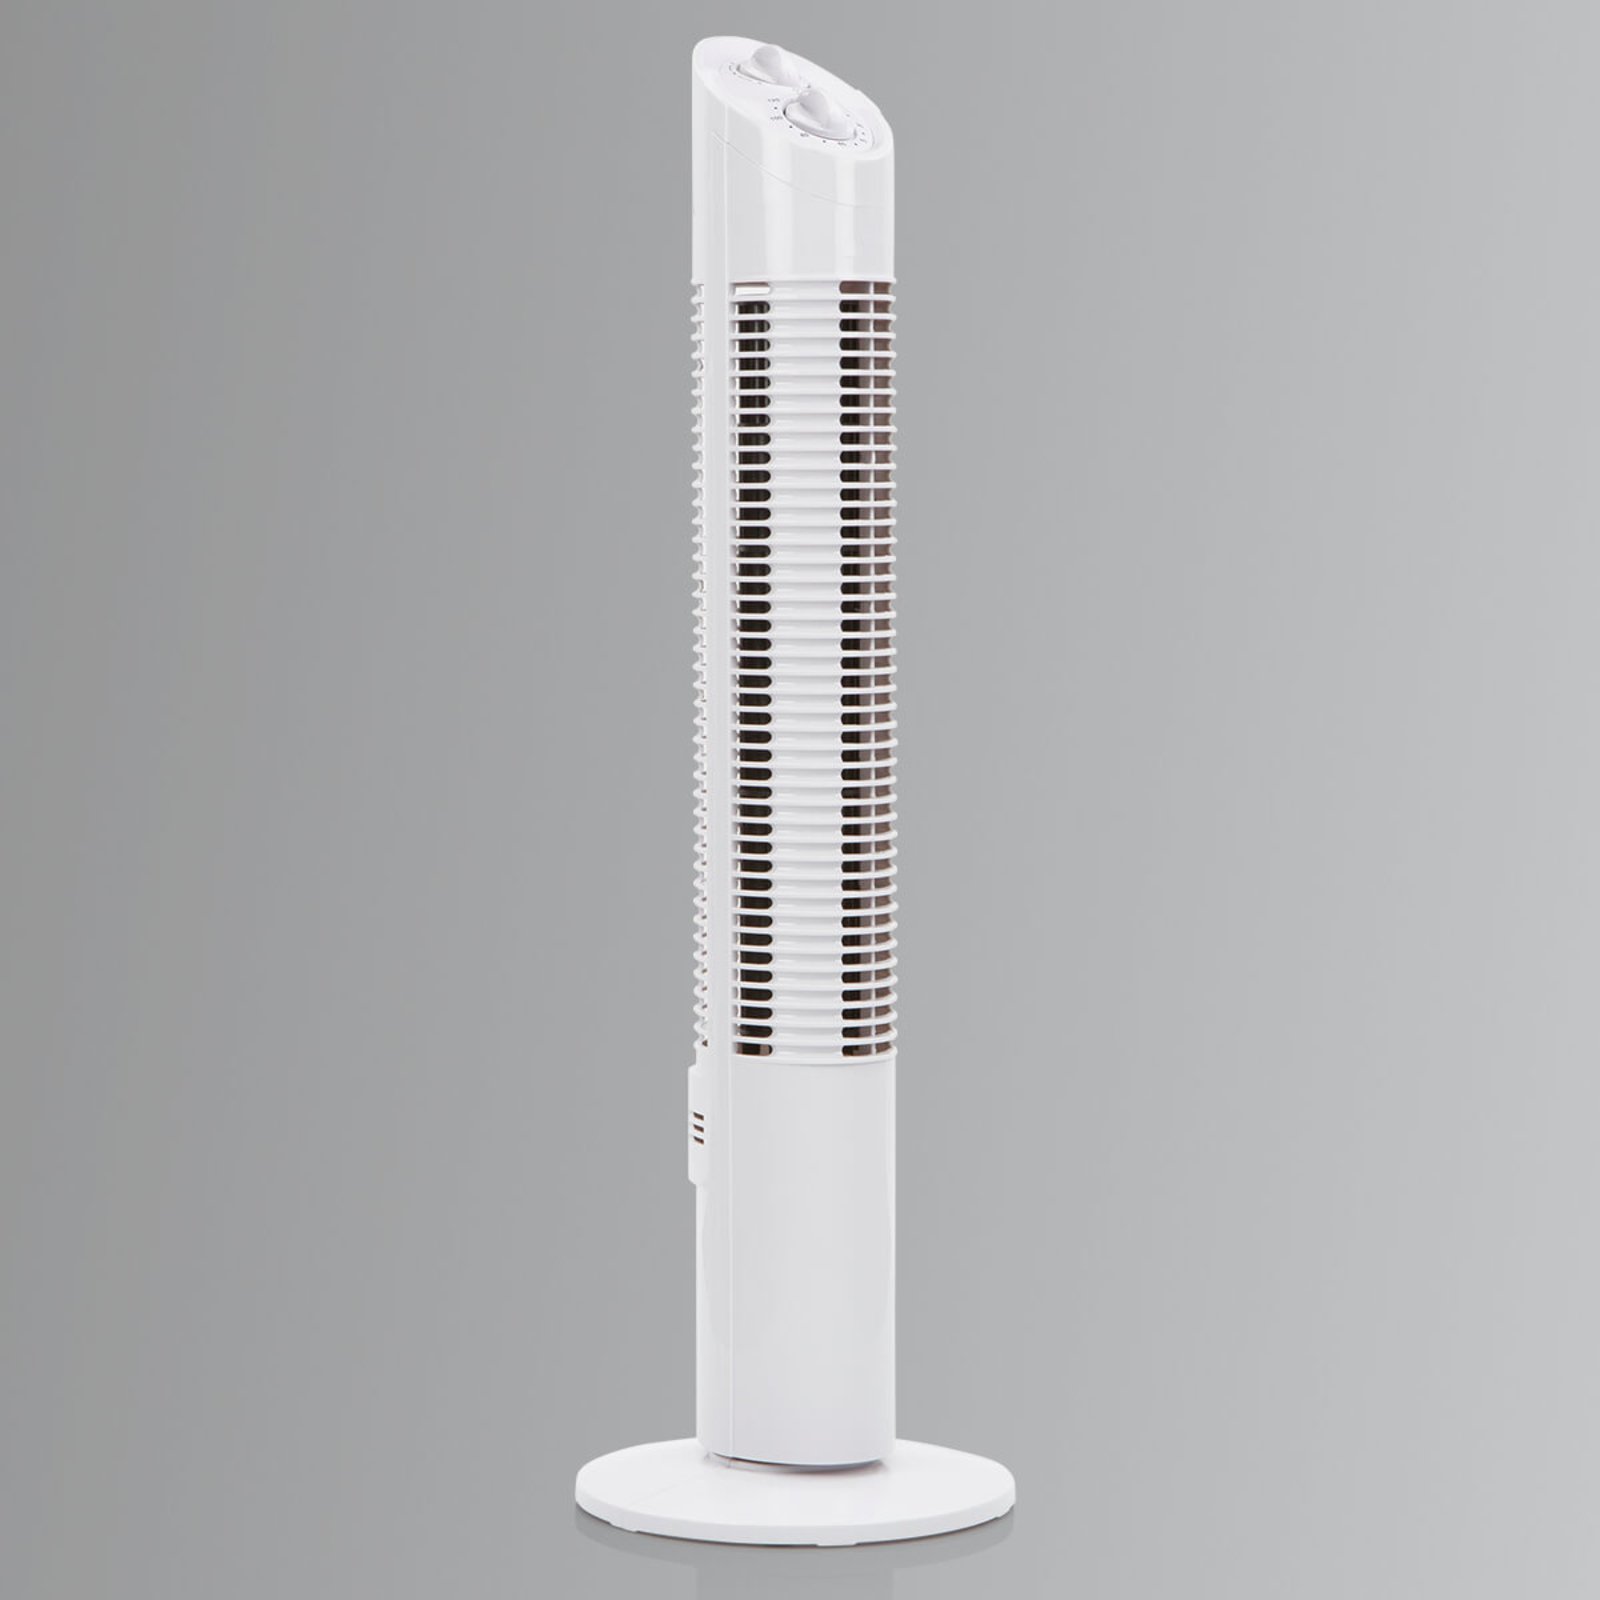 Convenient VE5905 tower fan with a timer